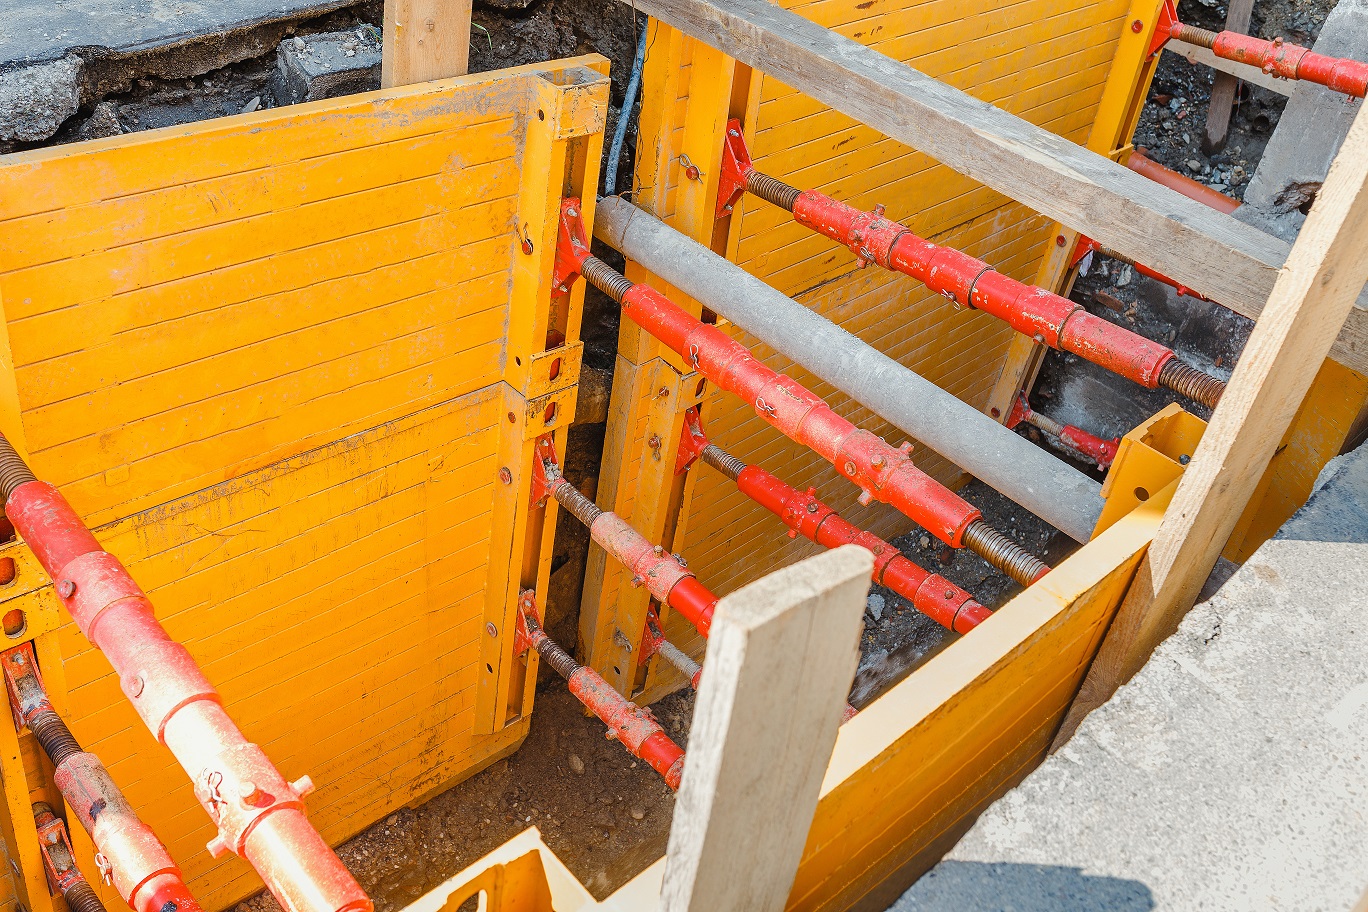 Construction firm agrees settlement with OSHA, pays $380K penalty and to provide Job Site Inspections on Trenching and Excavation Hazards